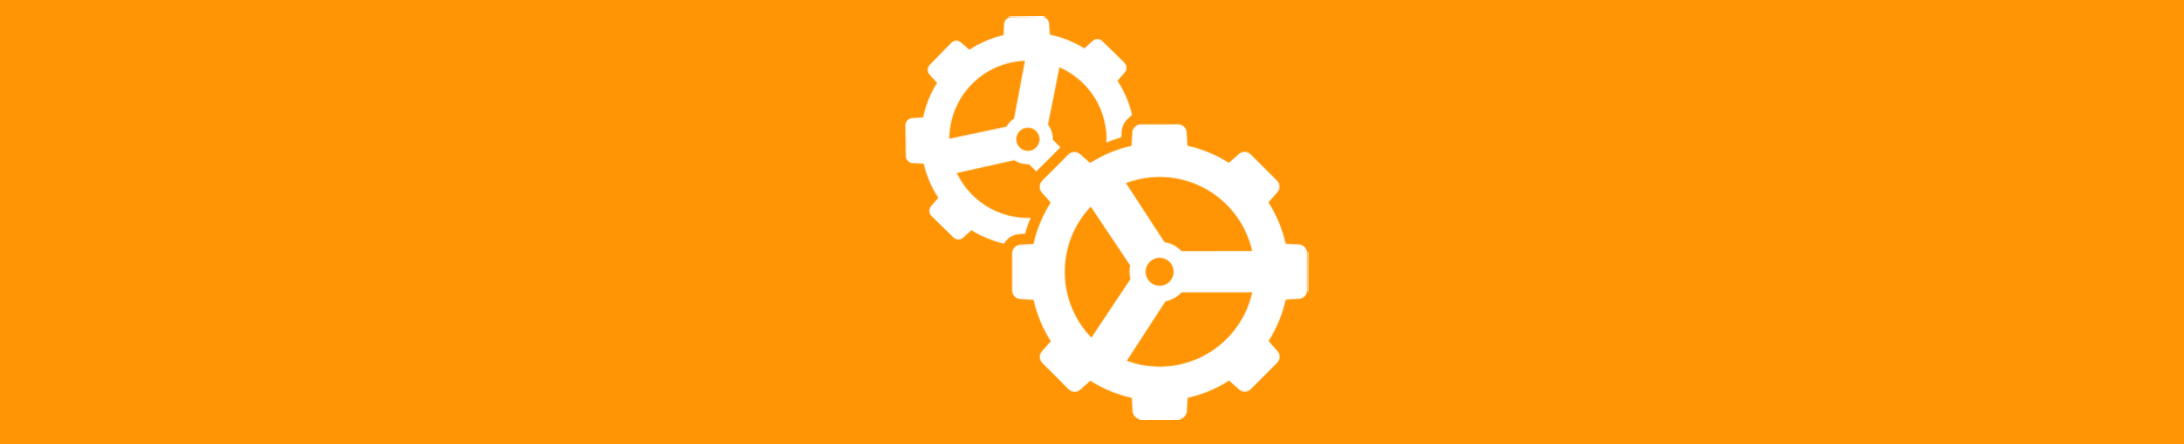 Business Logic Icon: Gear and Wrench